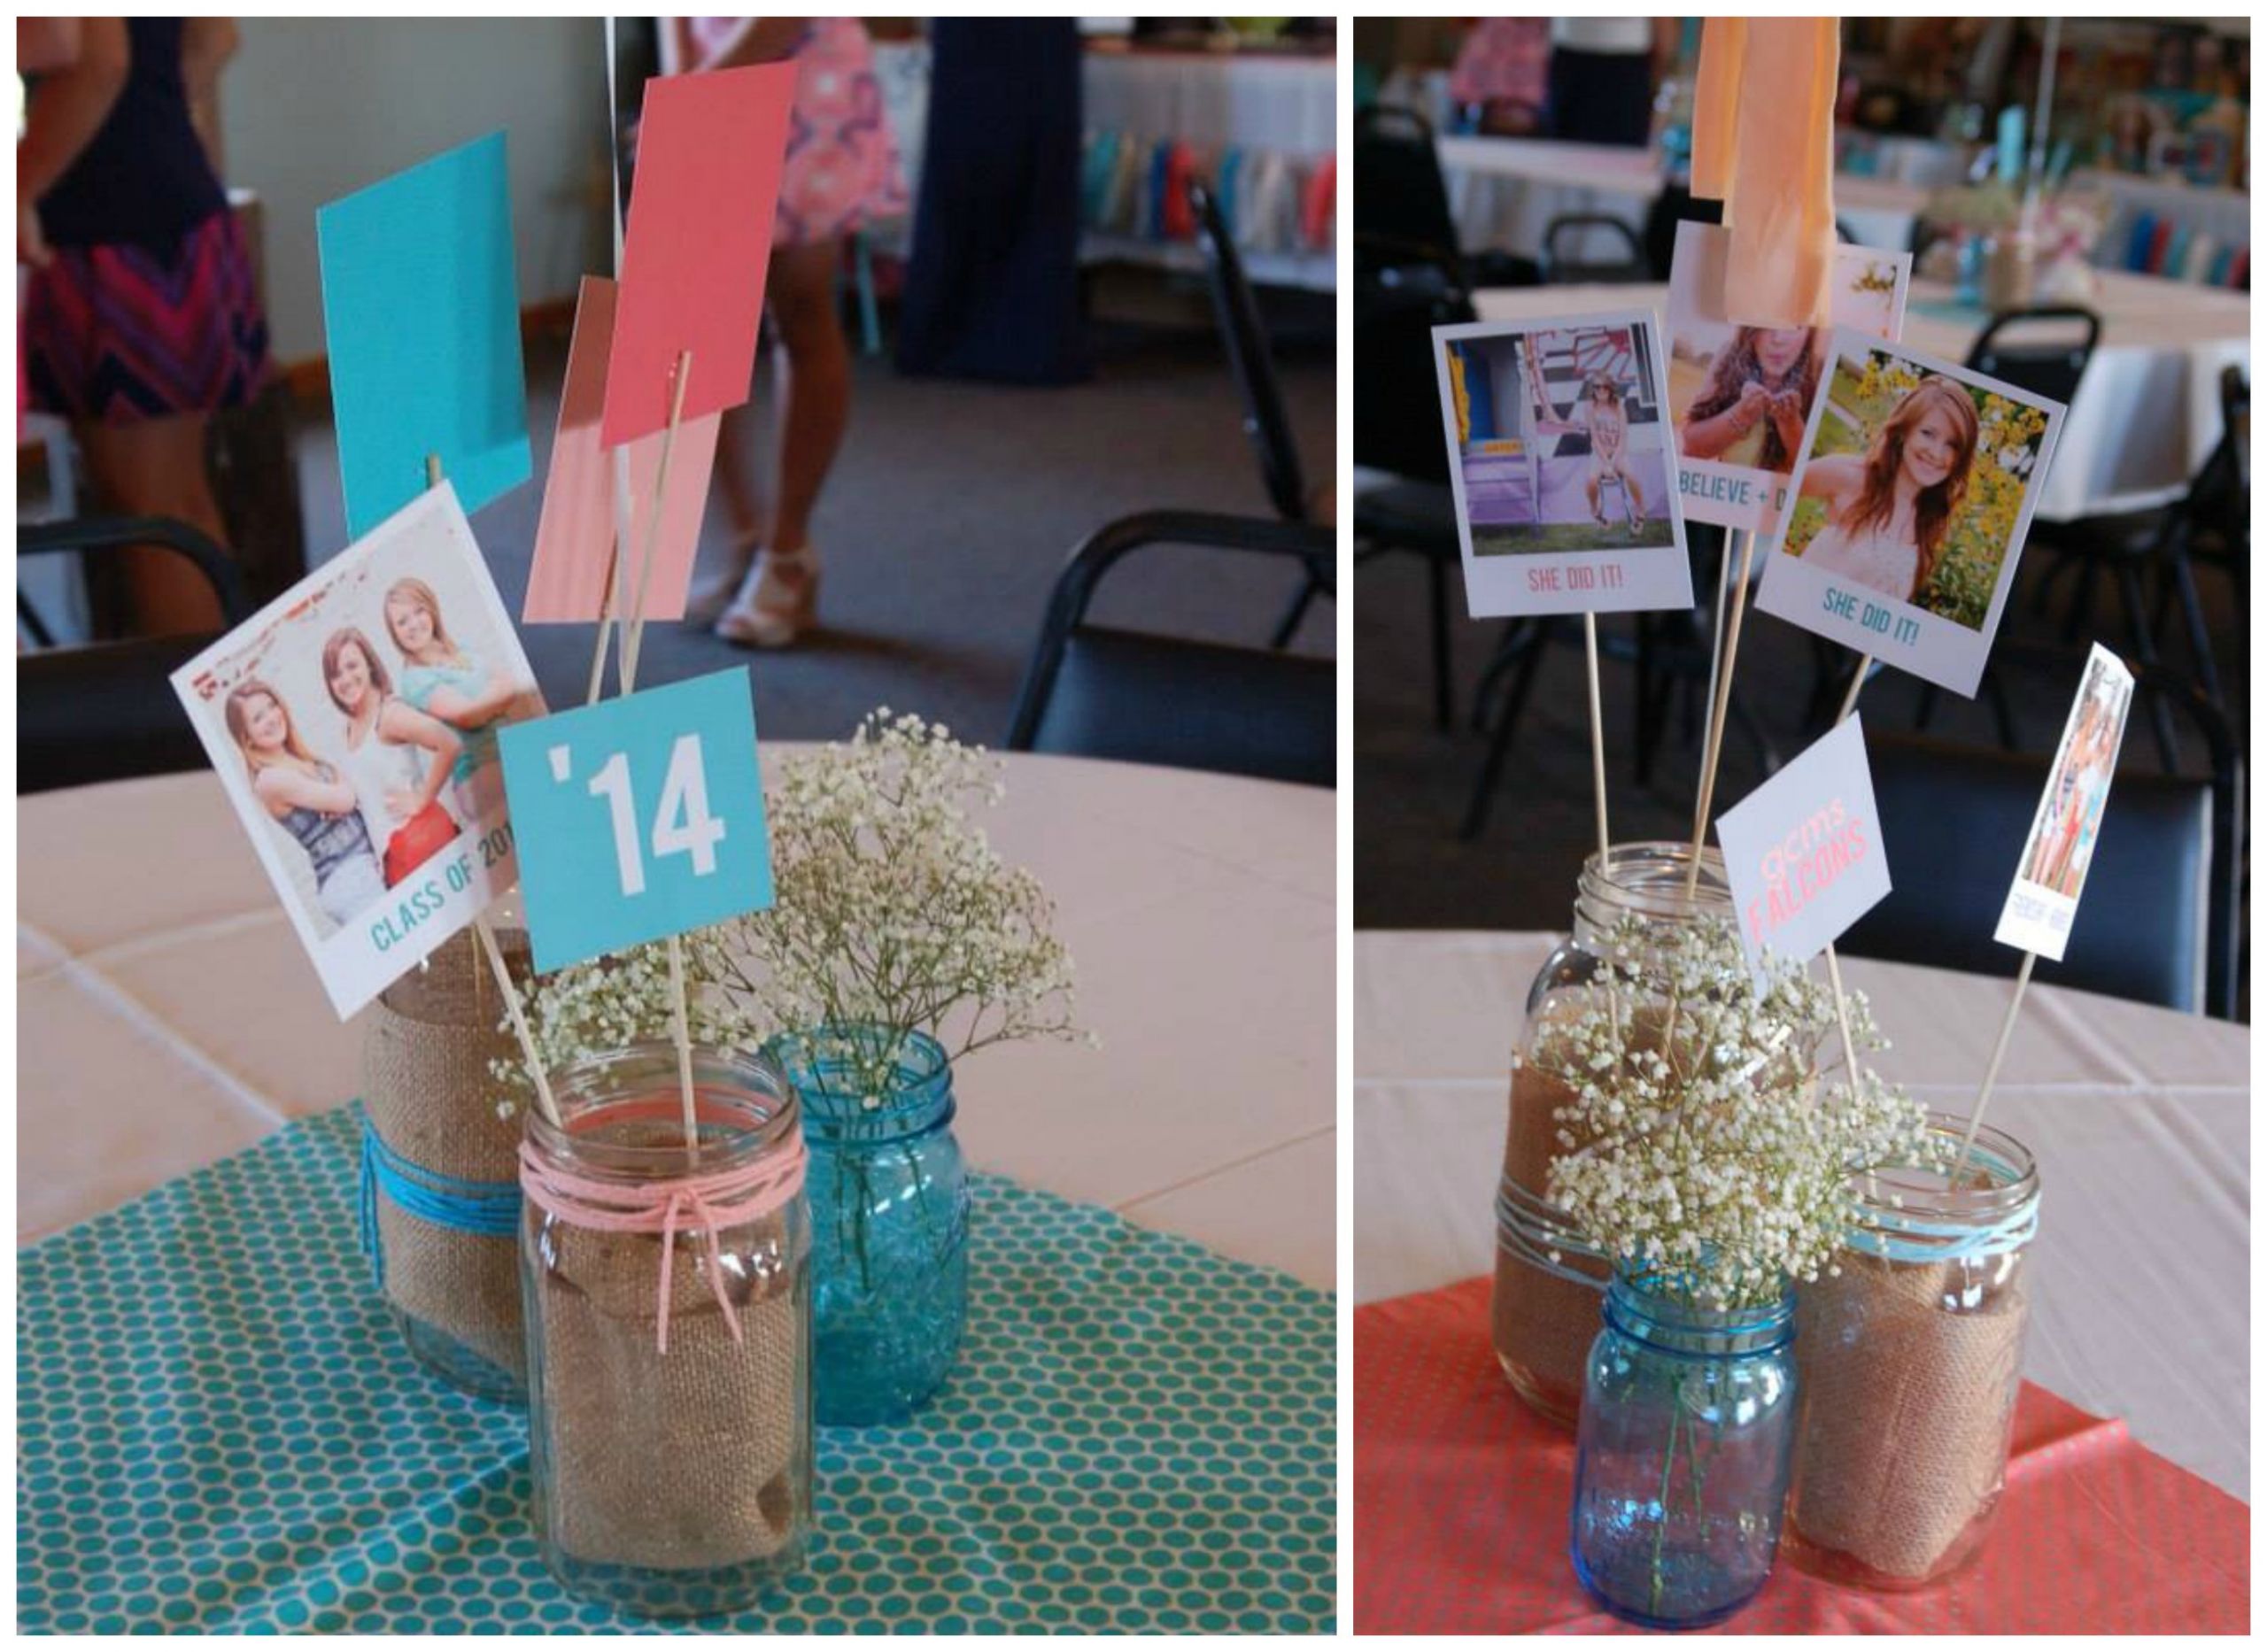 Centerpiece Ideas For A Graduation Party
 Graduation Party Ideas from a recent Featured Favorite